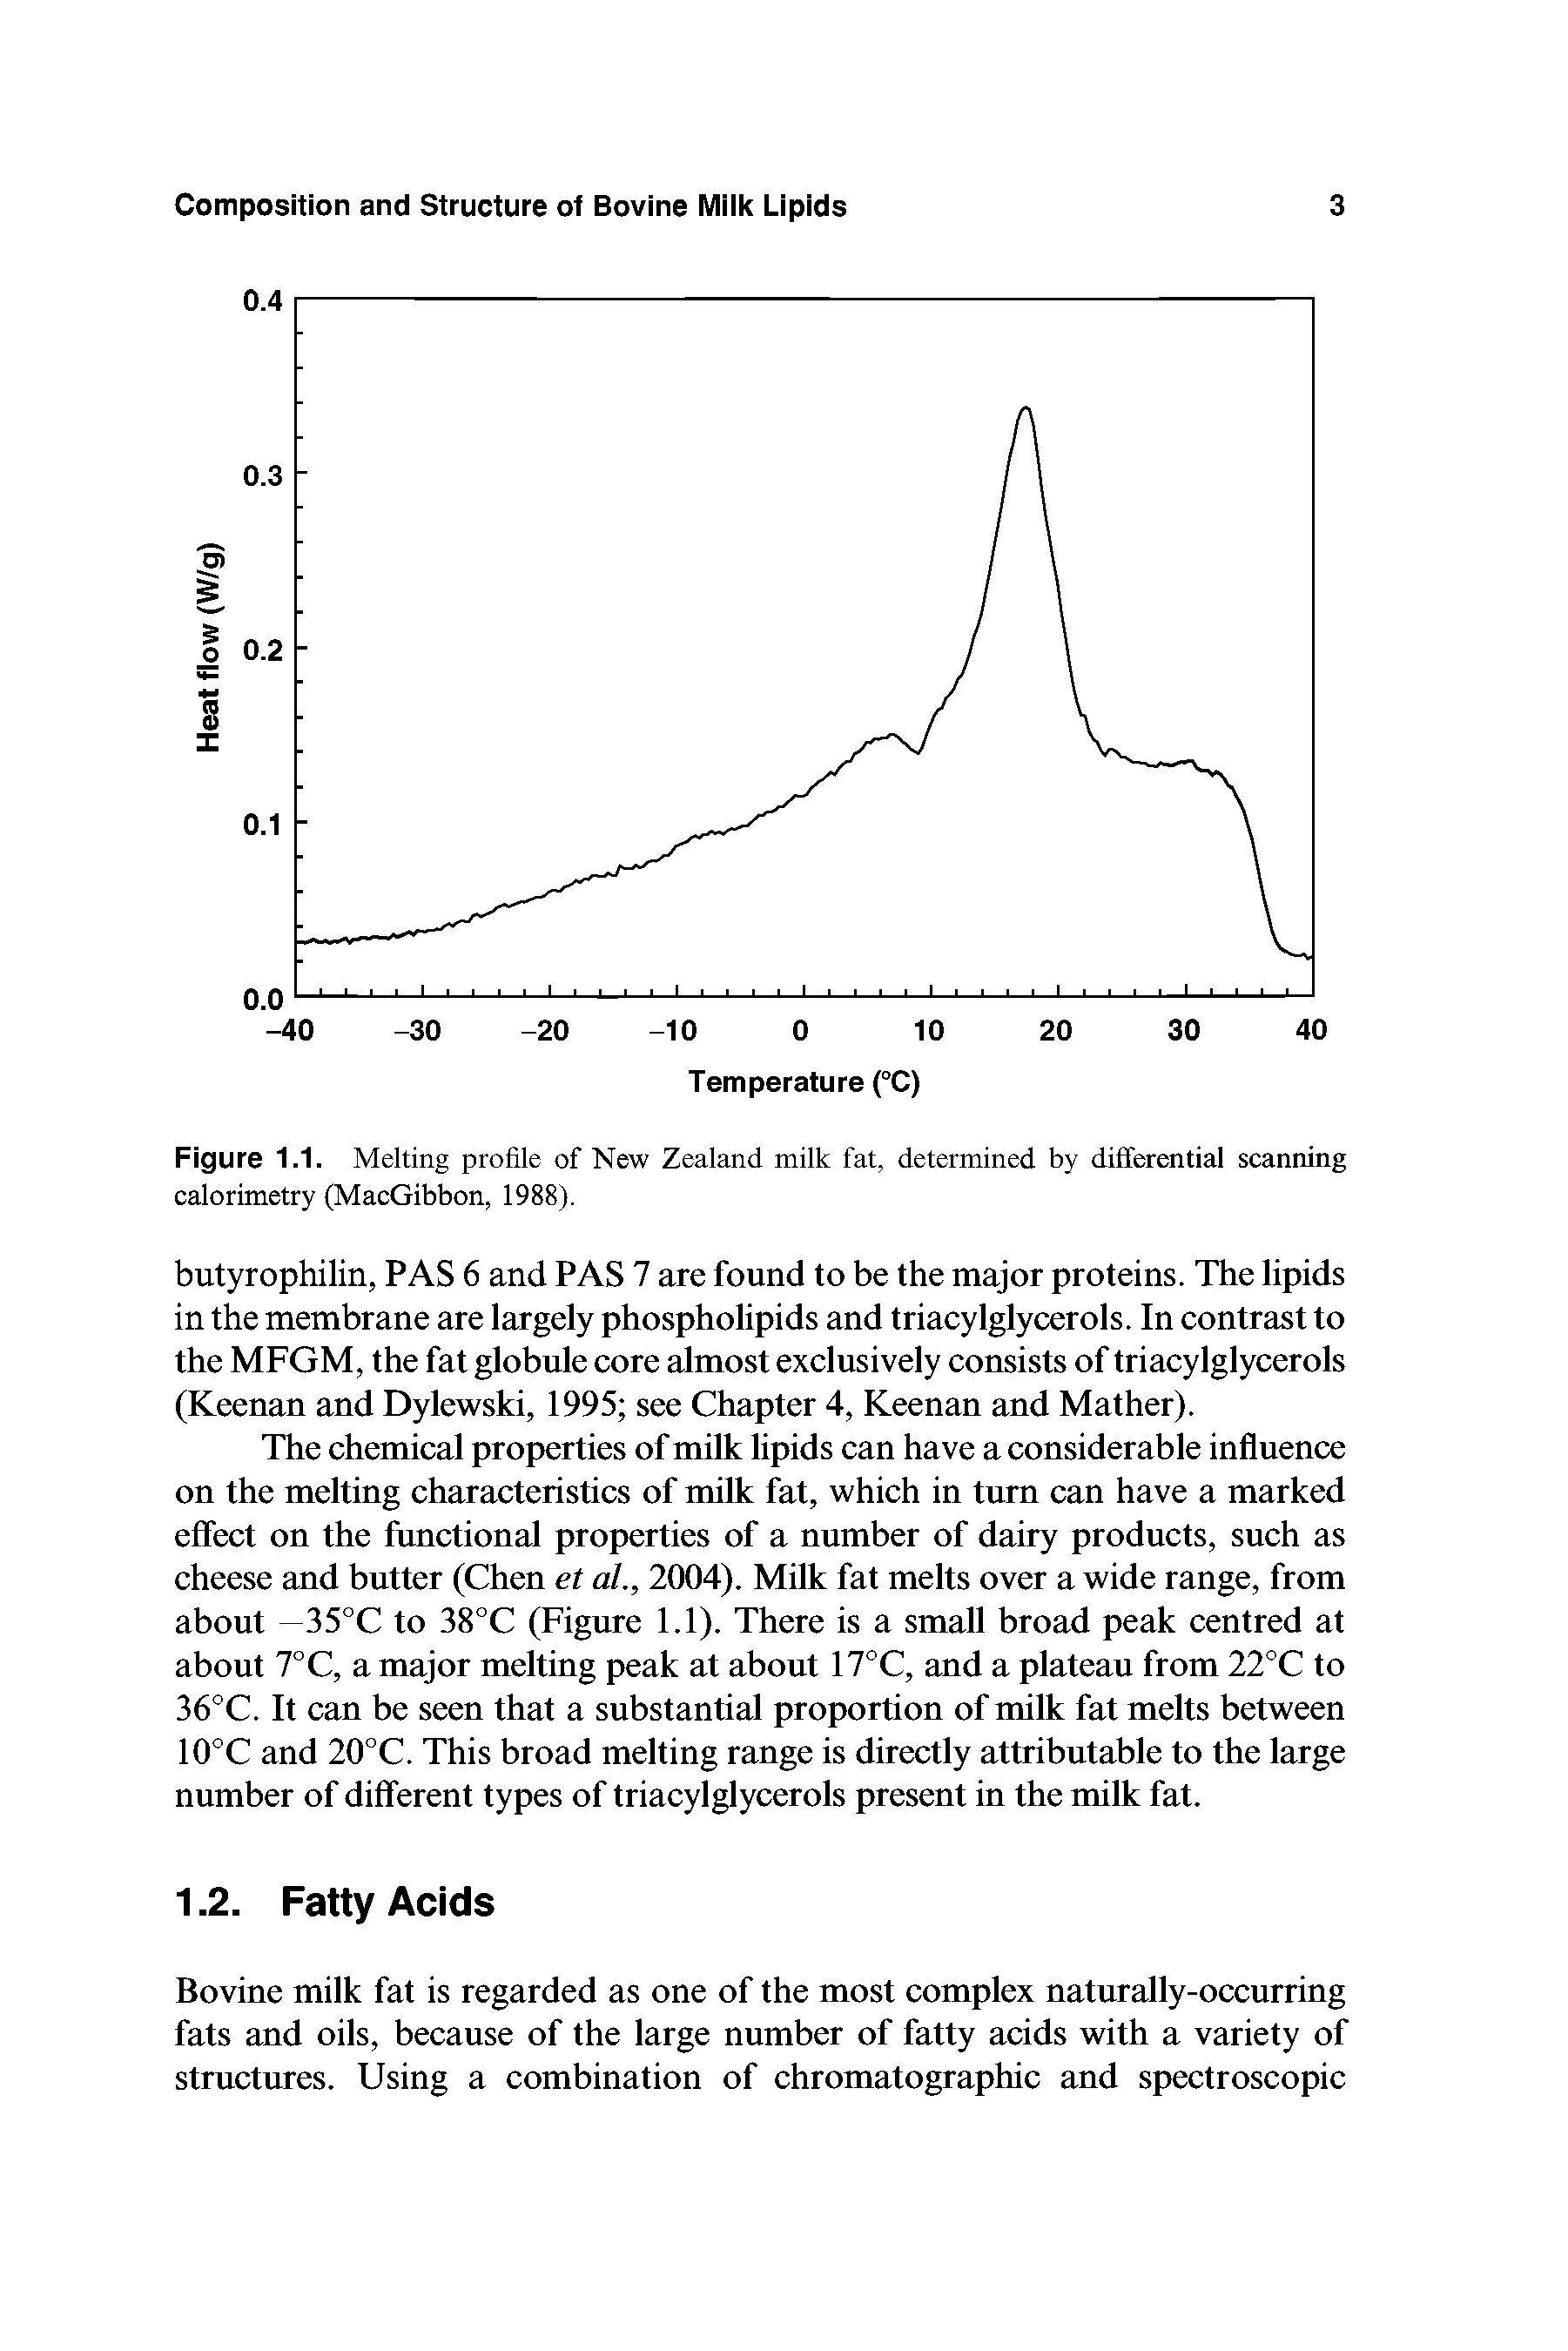 Figure 1.1. Melting profile of New Zealand milk fat, determined by differential scanning calorimetry (MacGibbon, 1988).